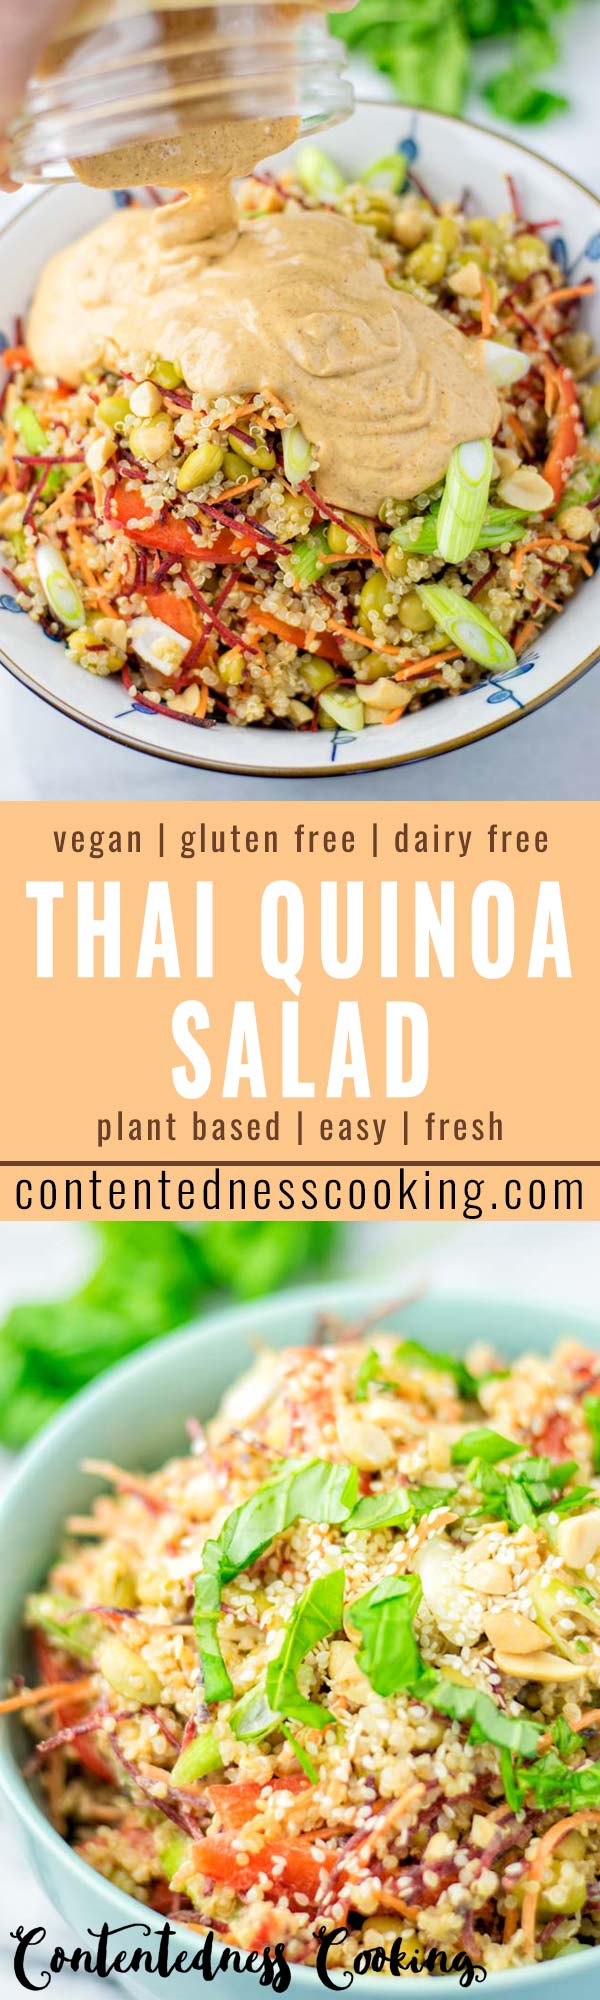 This Thai Quinoa Salad is super easy to make and naturally vegan, gluten free. It is all covered with the most delicious dressing you can ask you. Enjoy it for dinner, lunch, meal prep, work lunch and quick family meals. Even the pickiest kids will love it in no time. #vegan #dairyfree #glutenfree #dinner #lunch #mealprep #bugdetmeals #worklunchideas #vegetarian #contentednesscooking #familydinner #kidsmeals #thaiquinoasalad 